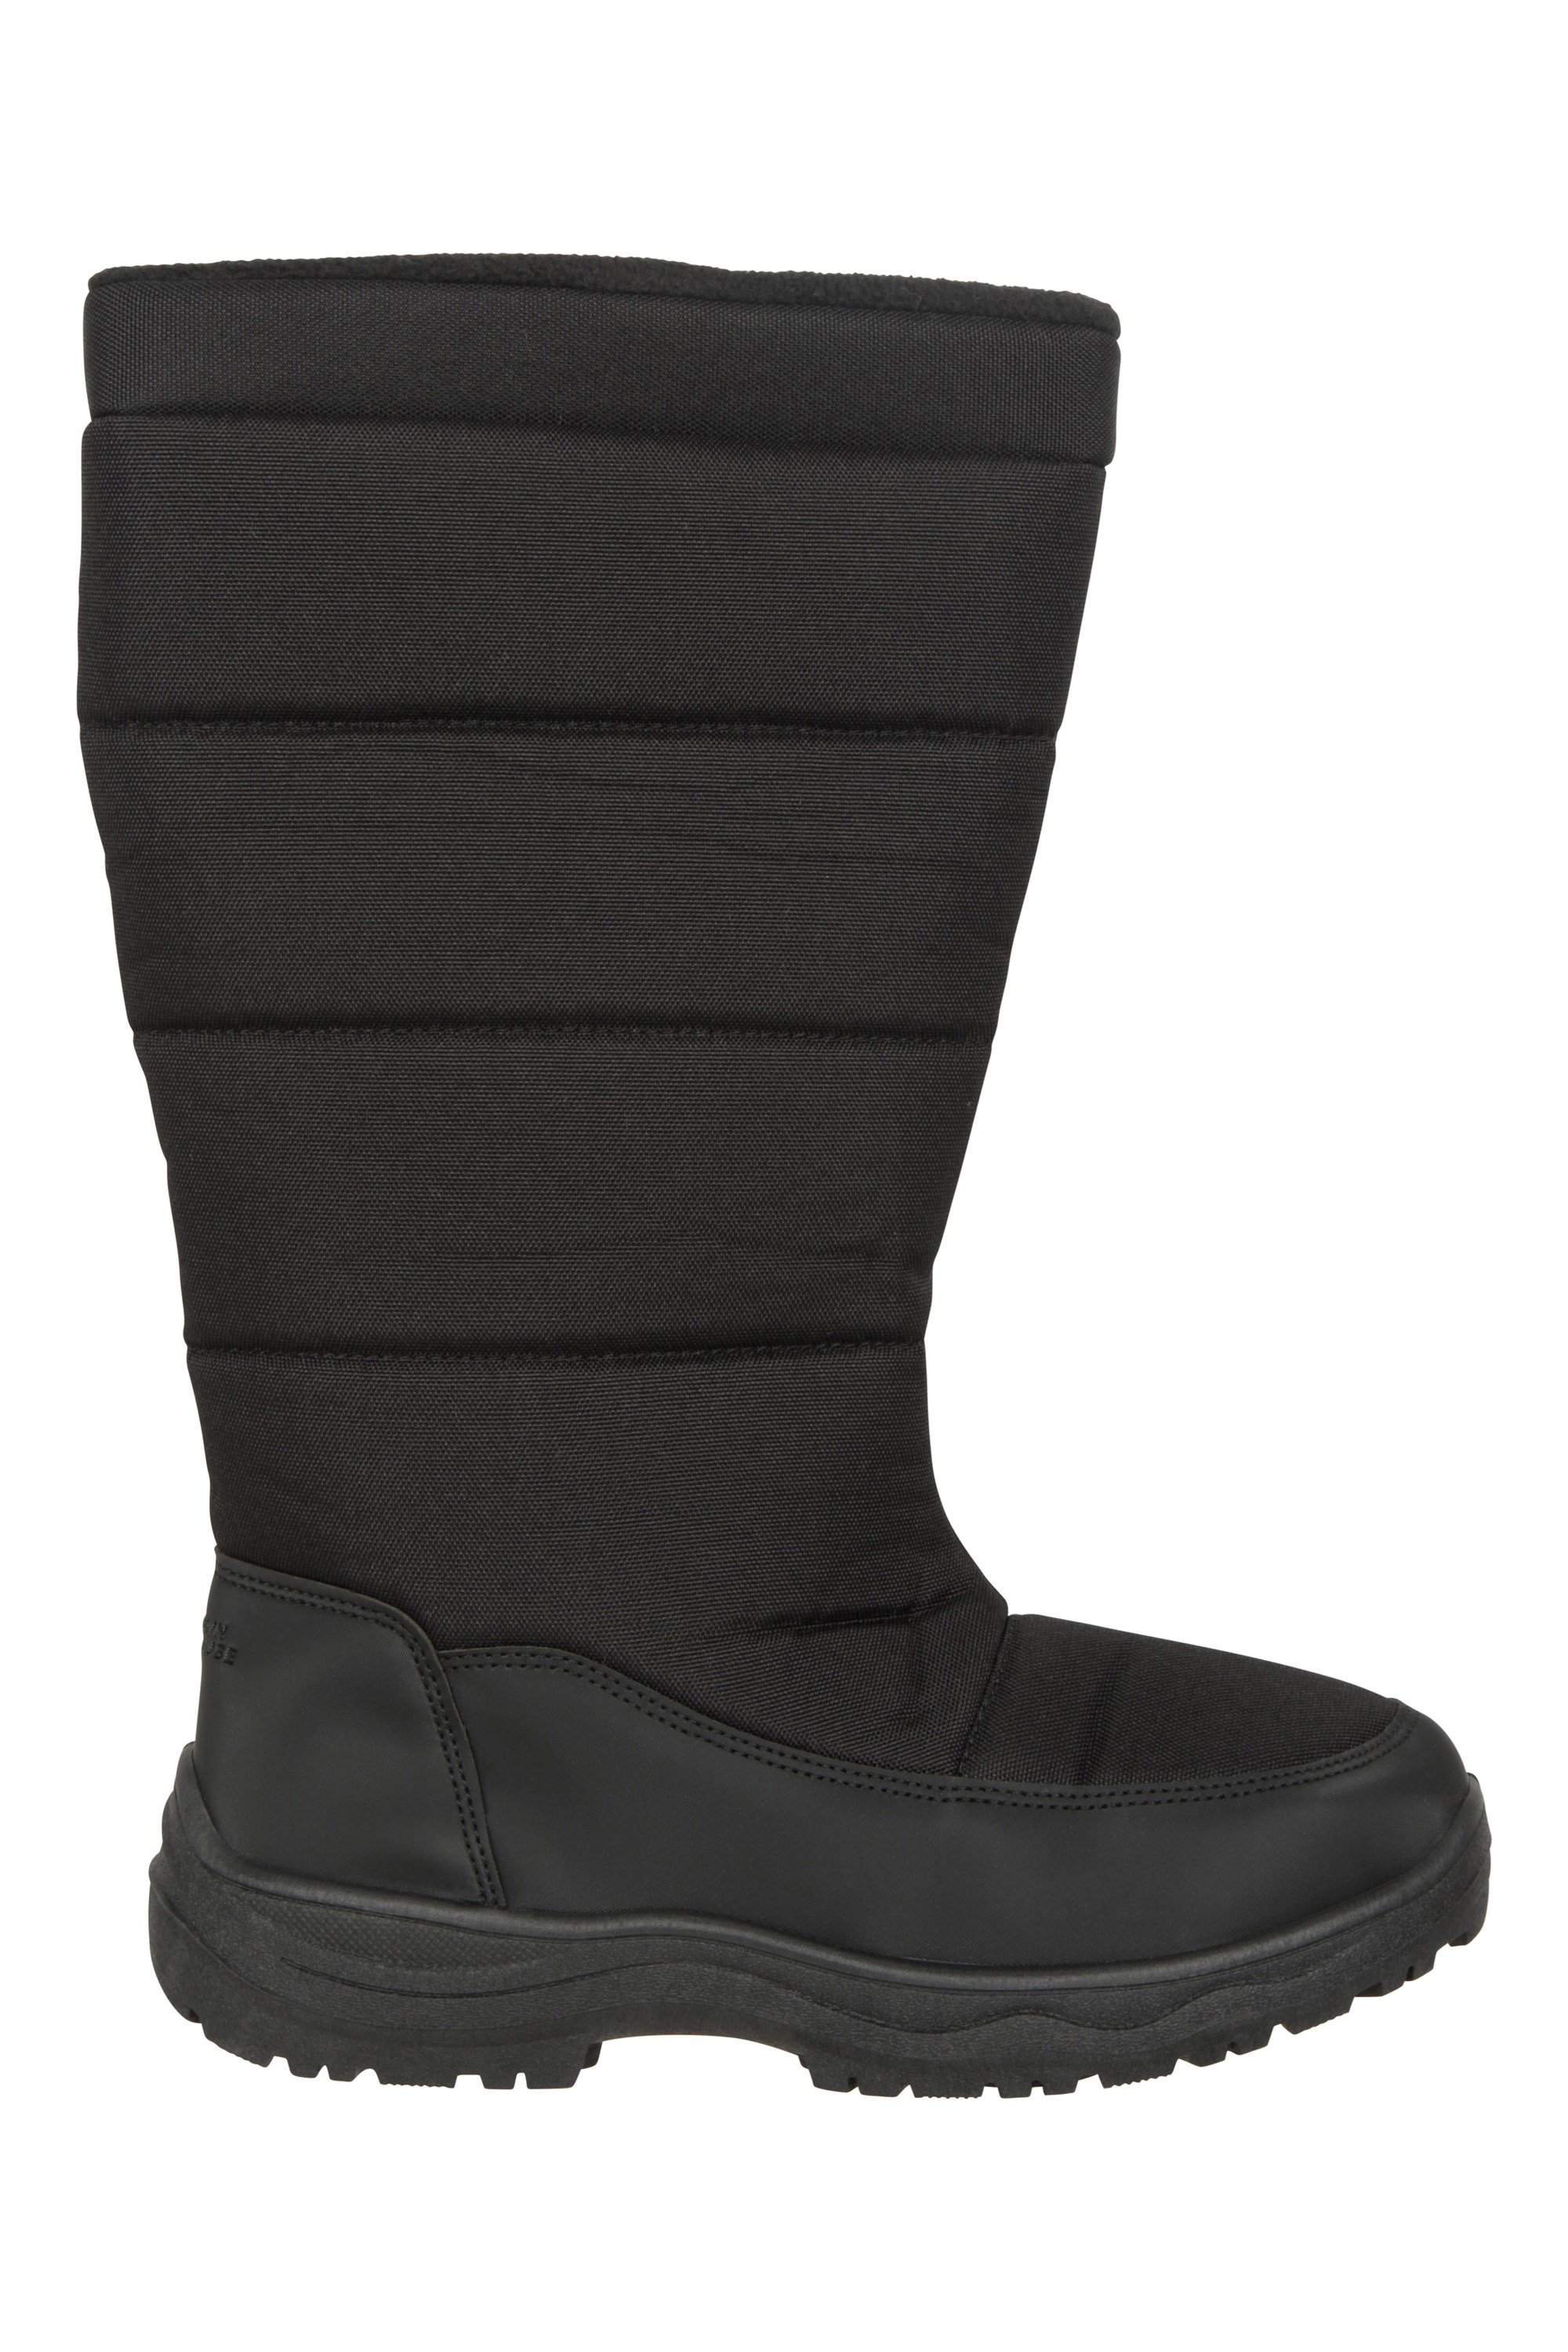 Icey Womens Long Snow Boots